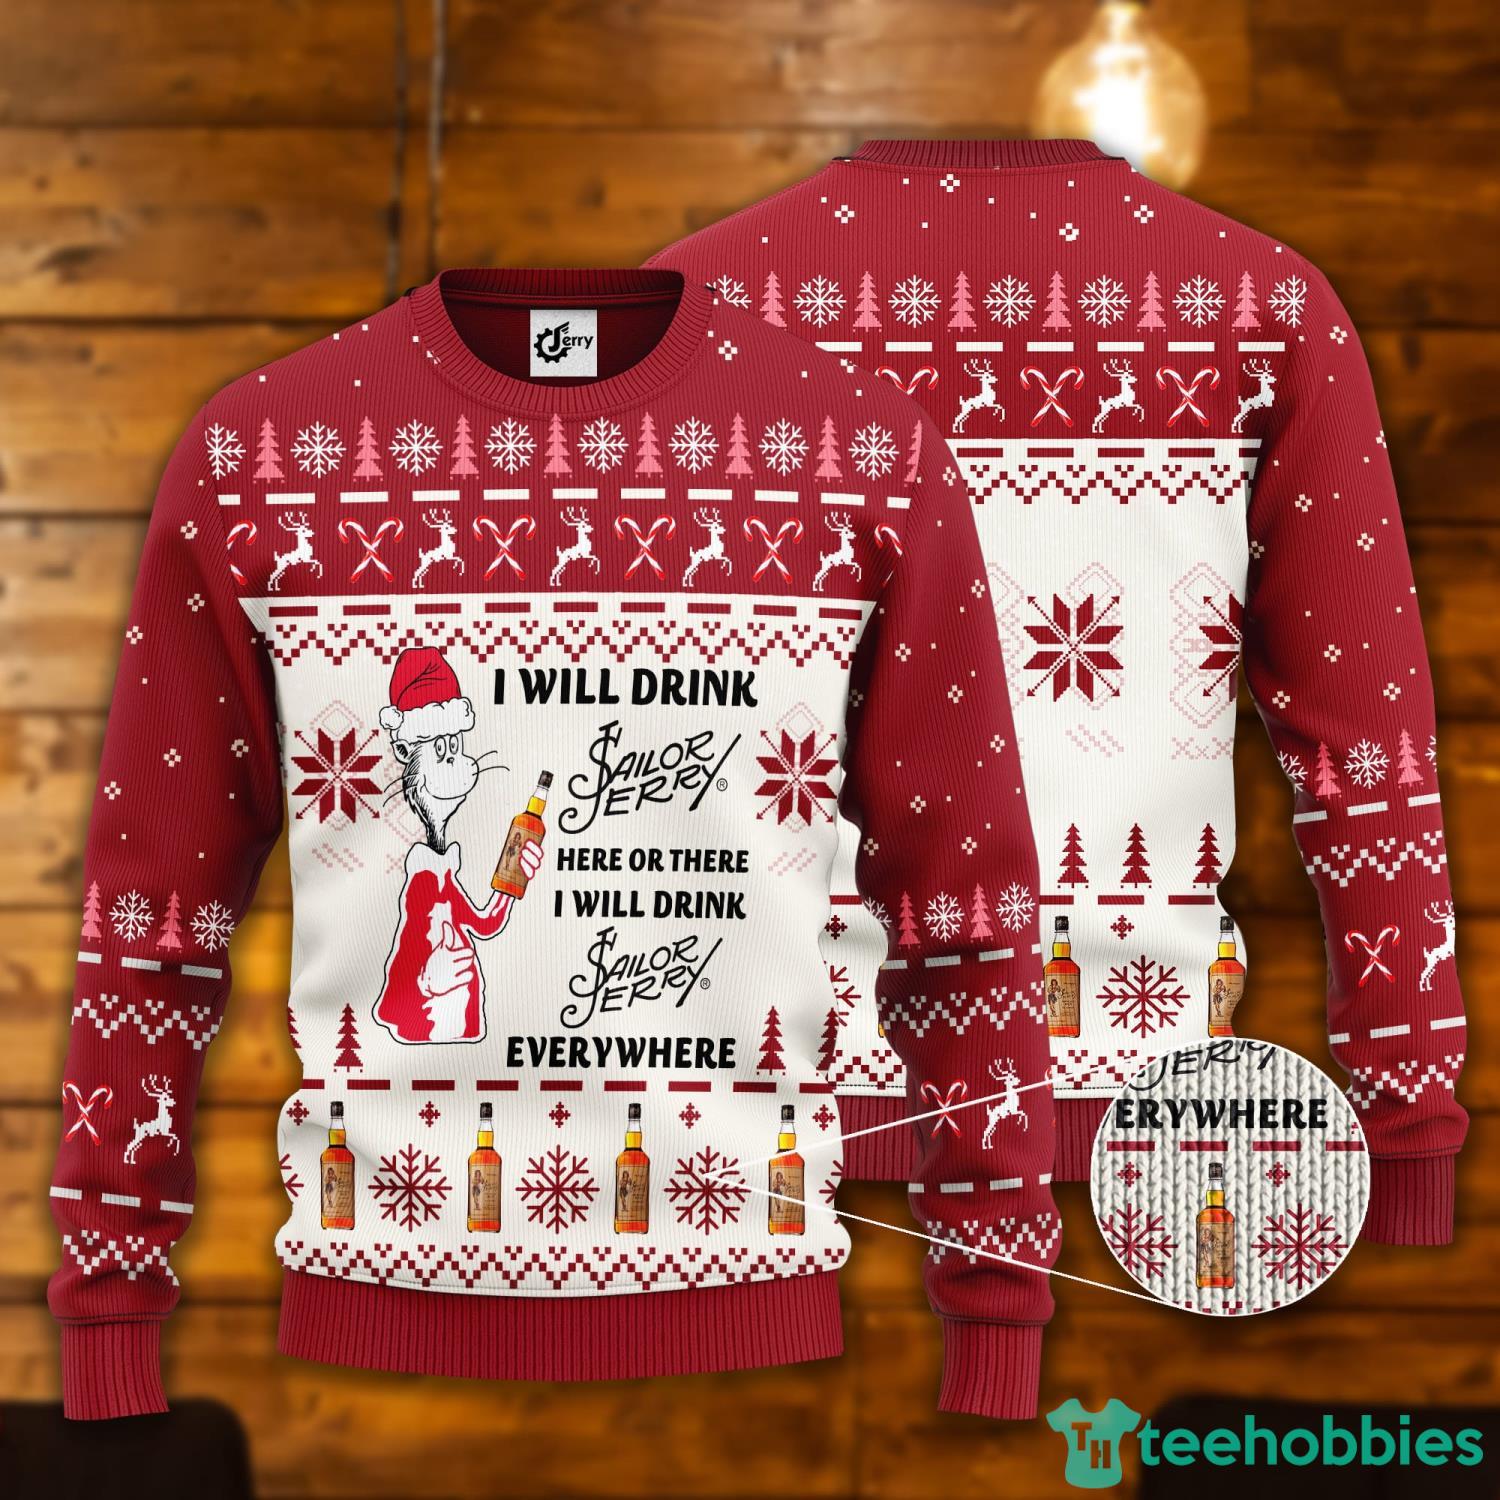 Dr. Seuss I Will Drink Sailor Jerry Here Or There Ugly Christmas Sweater Product Photo 1